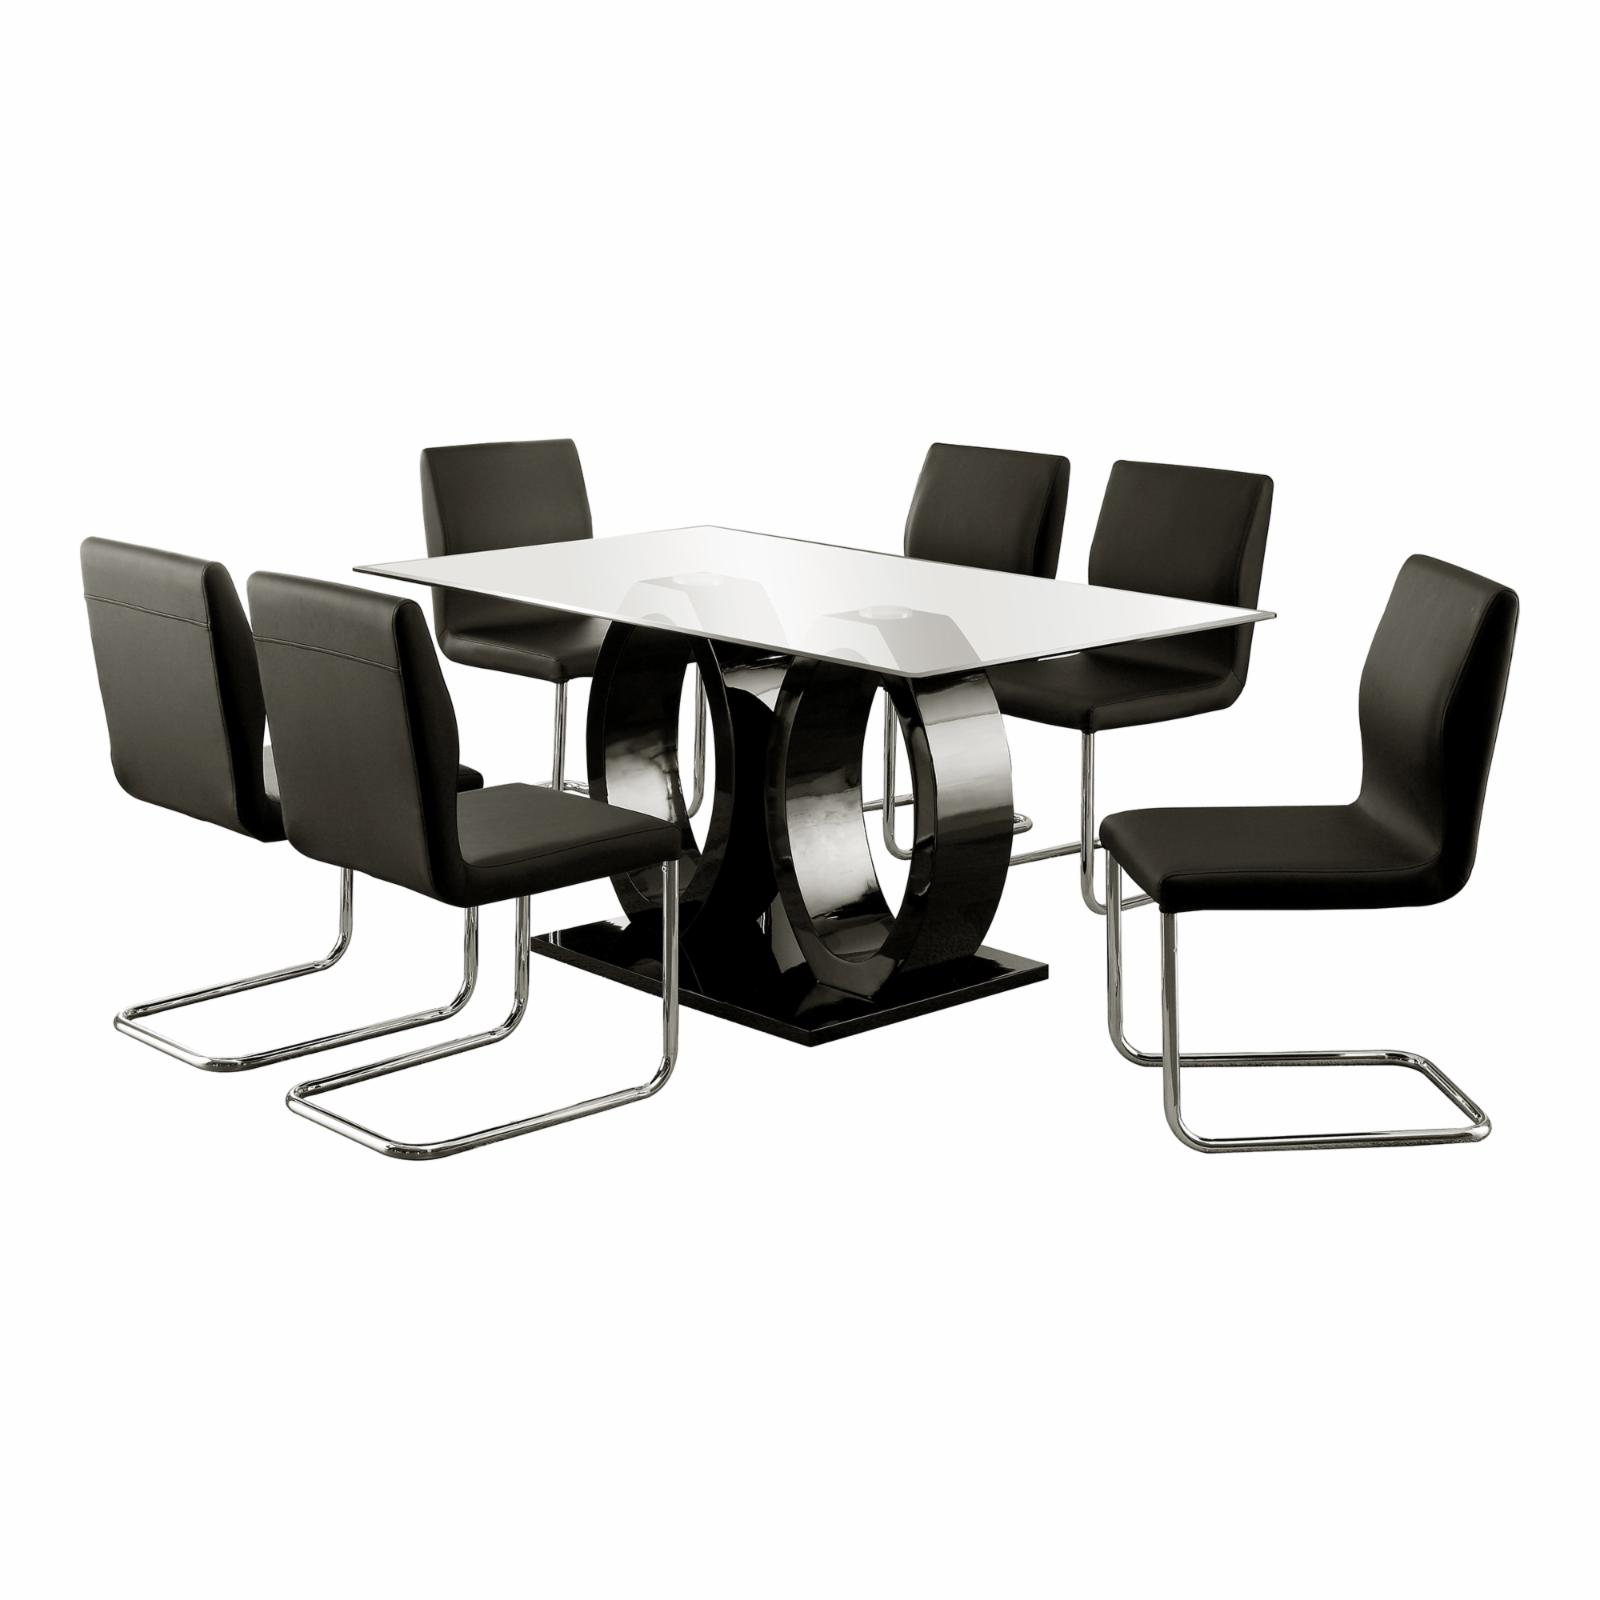 Furniture of America Damore Contemporary High Gloss Dining Table - image 3 of 9